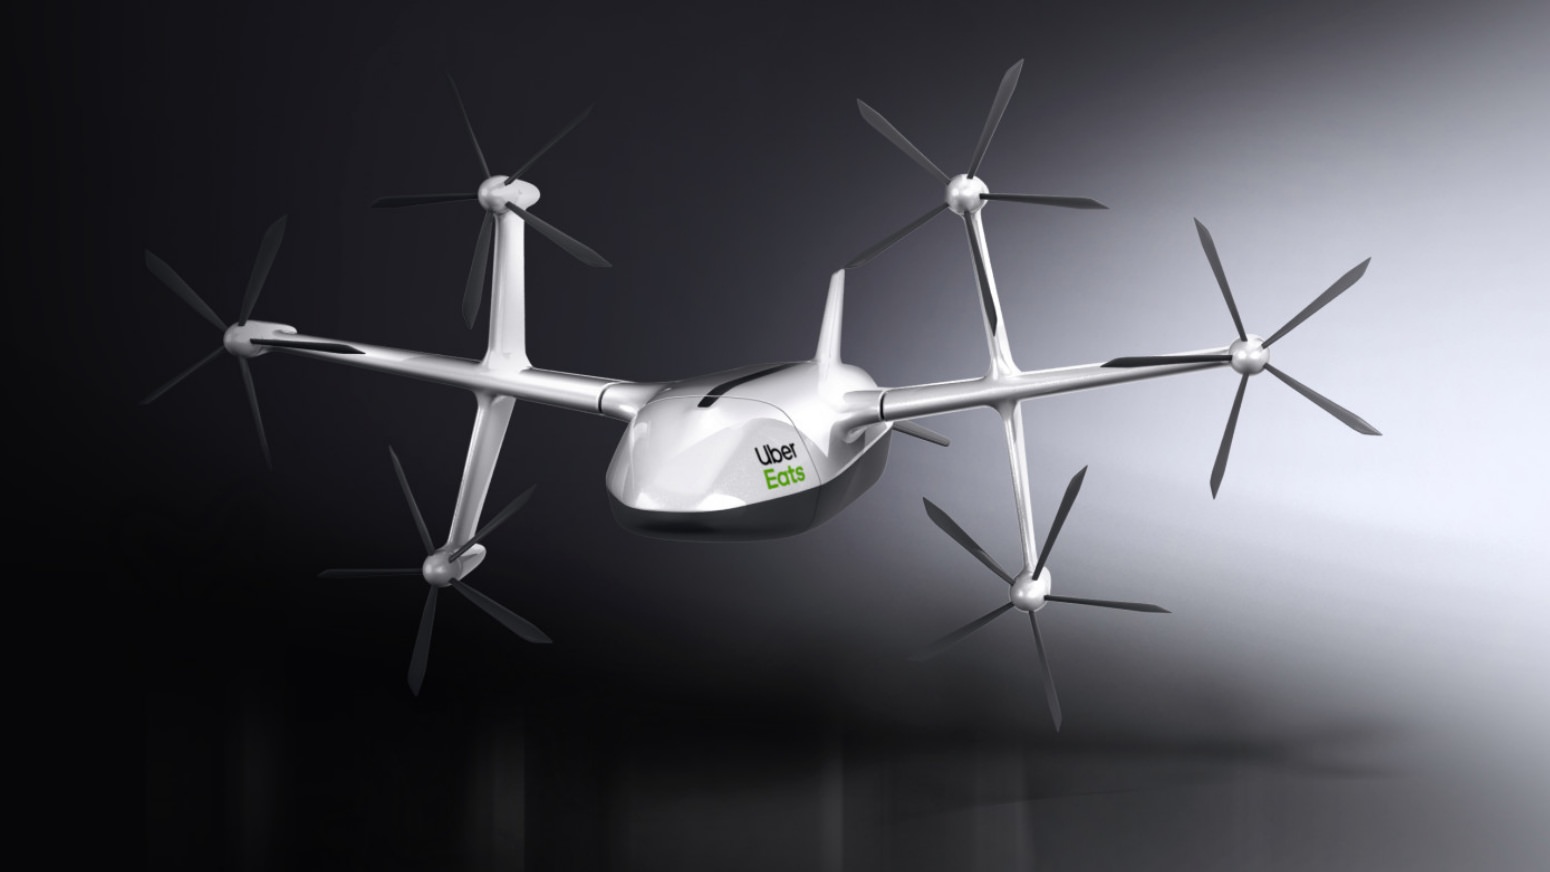 Check-out-the-Uber-Eats-delivery-drone.jpg